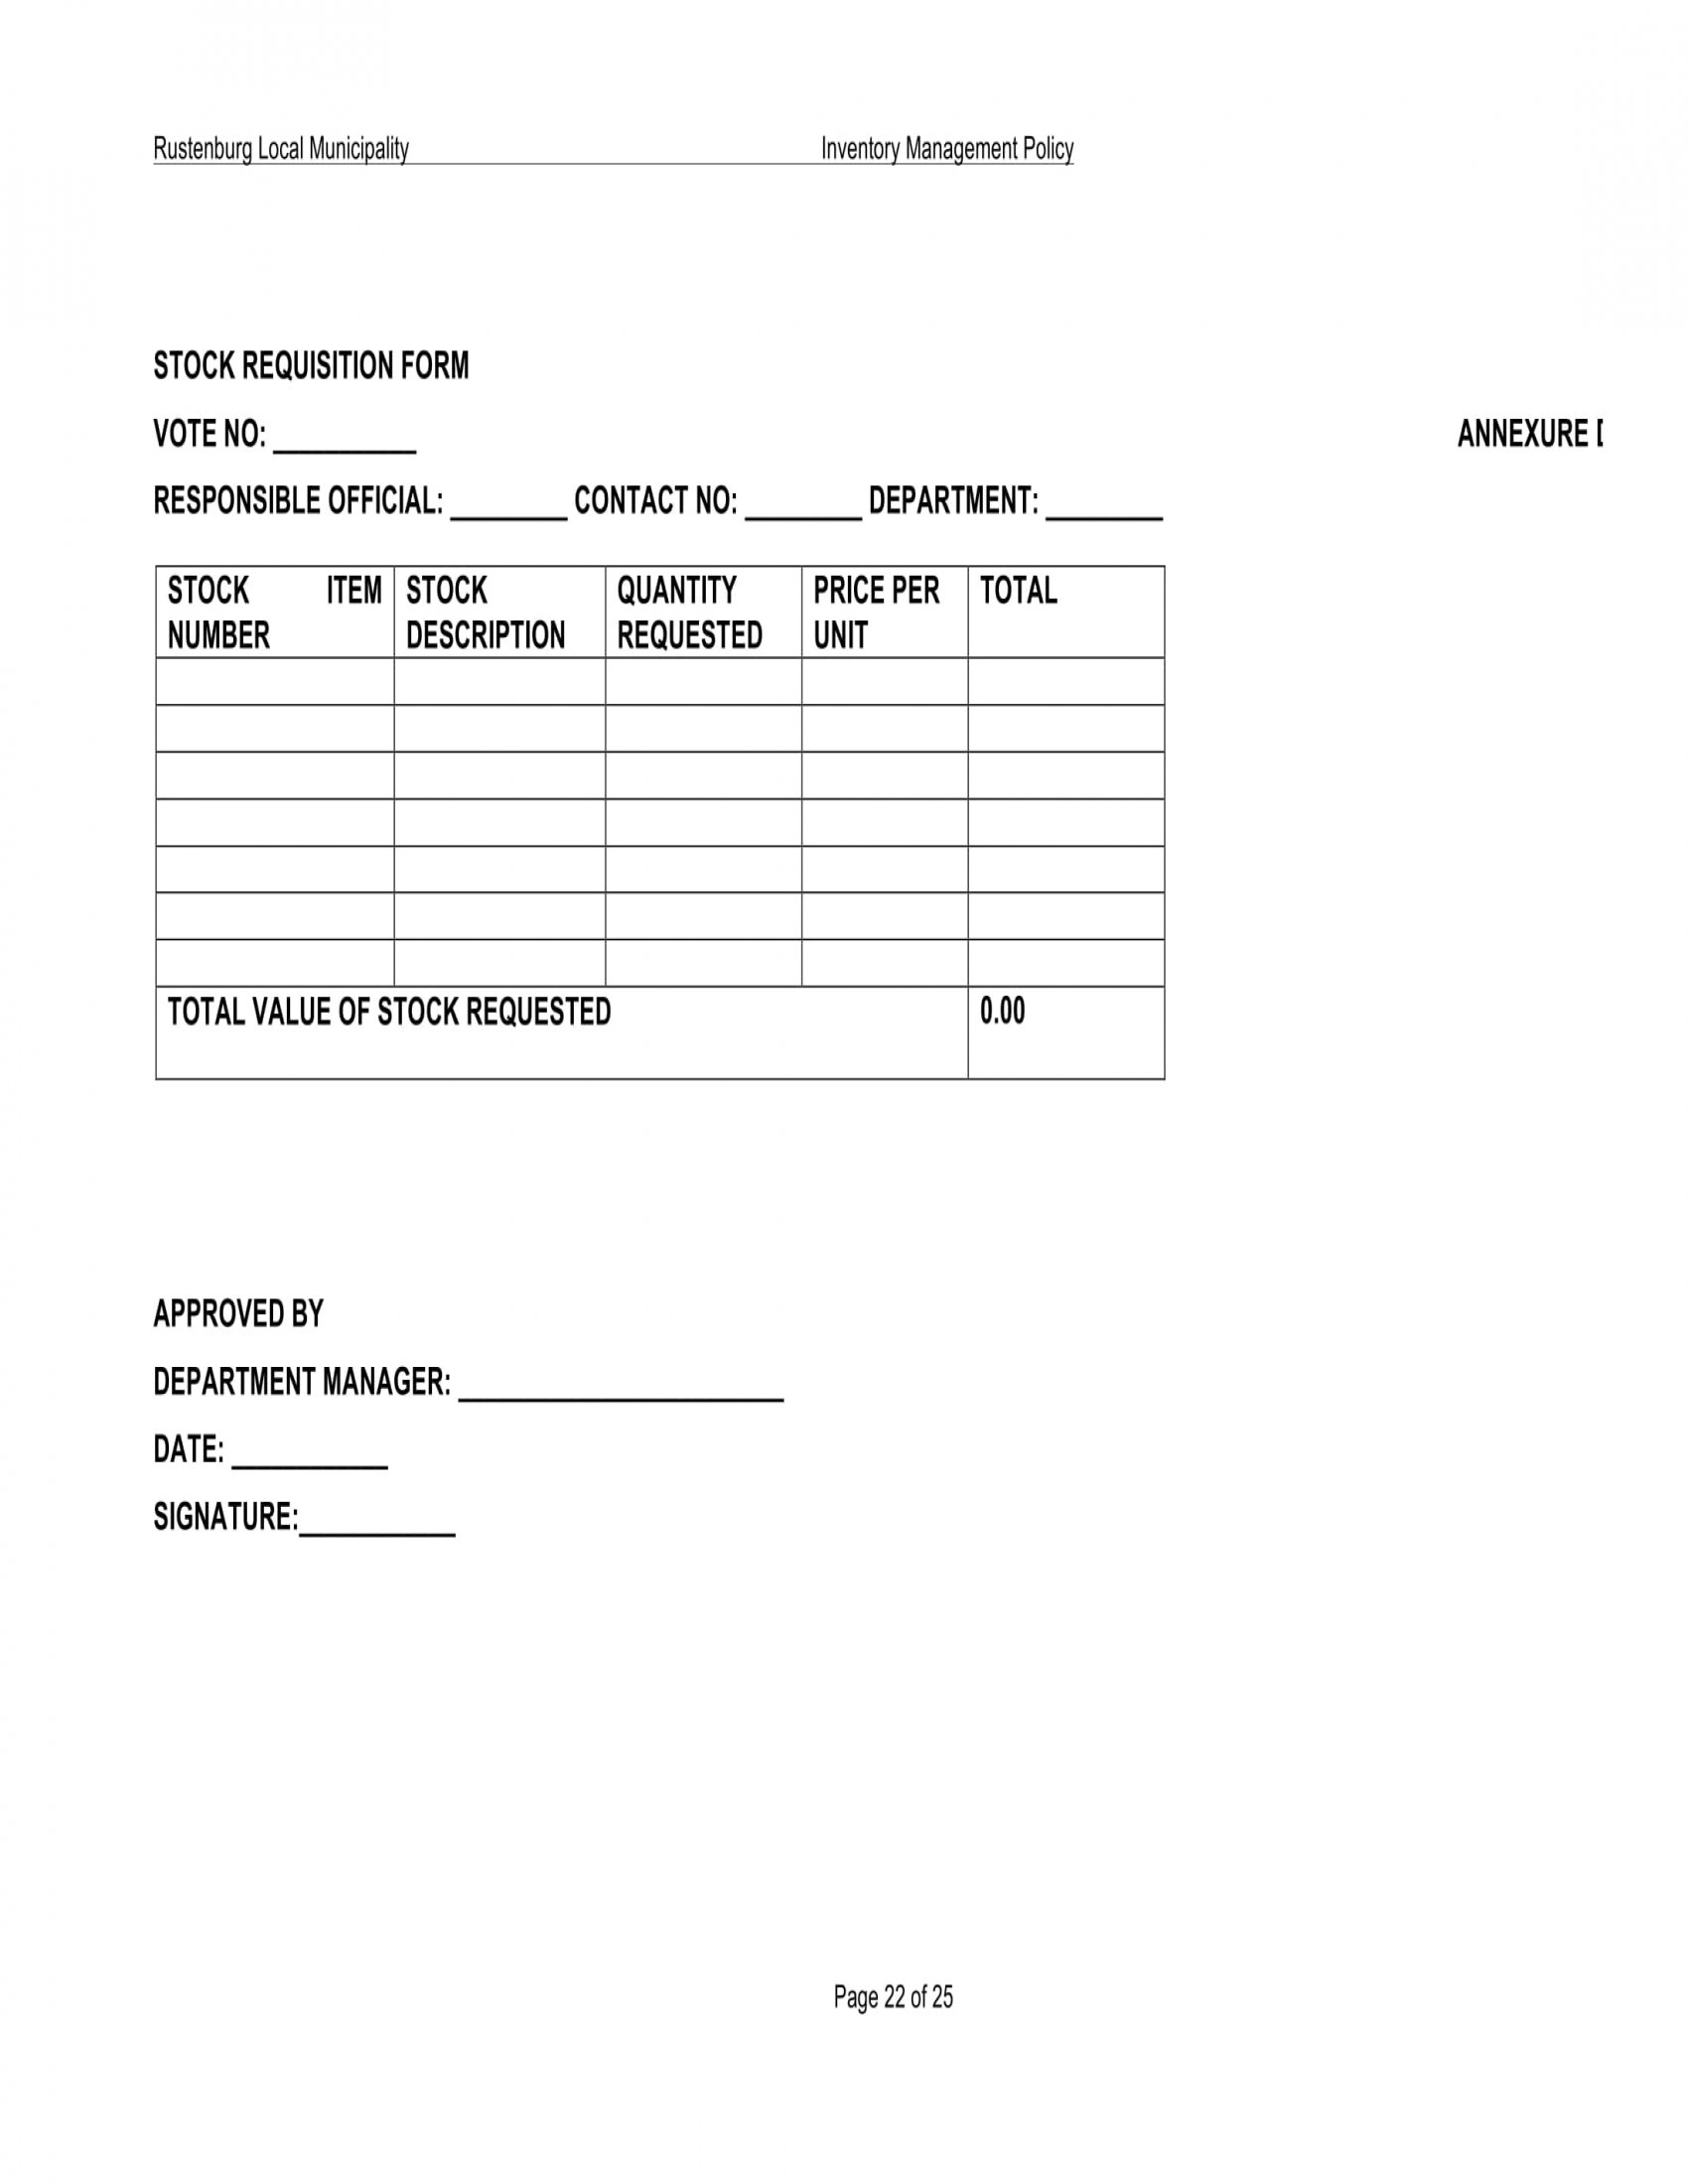 sample for stock requisition form 1